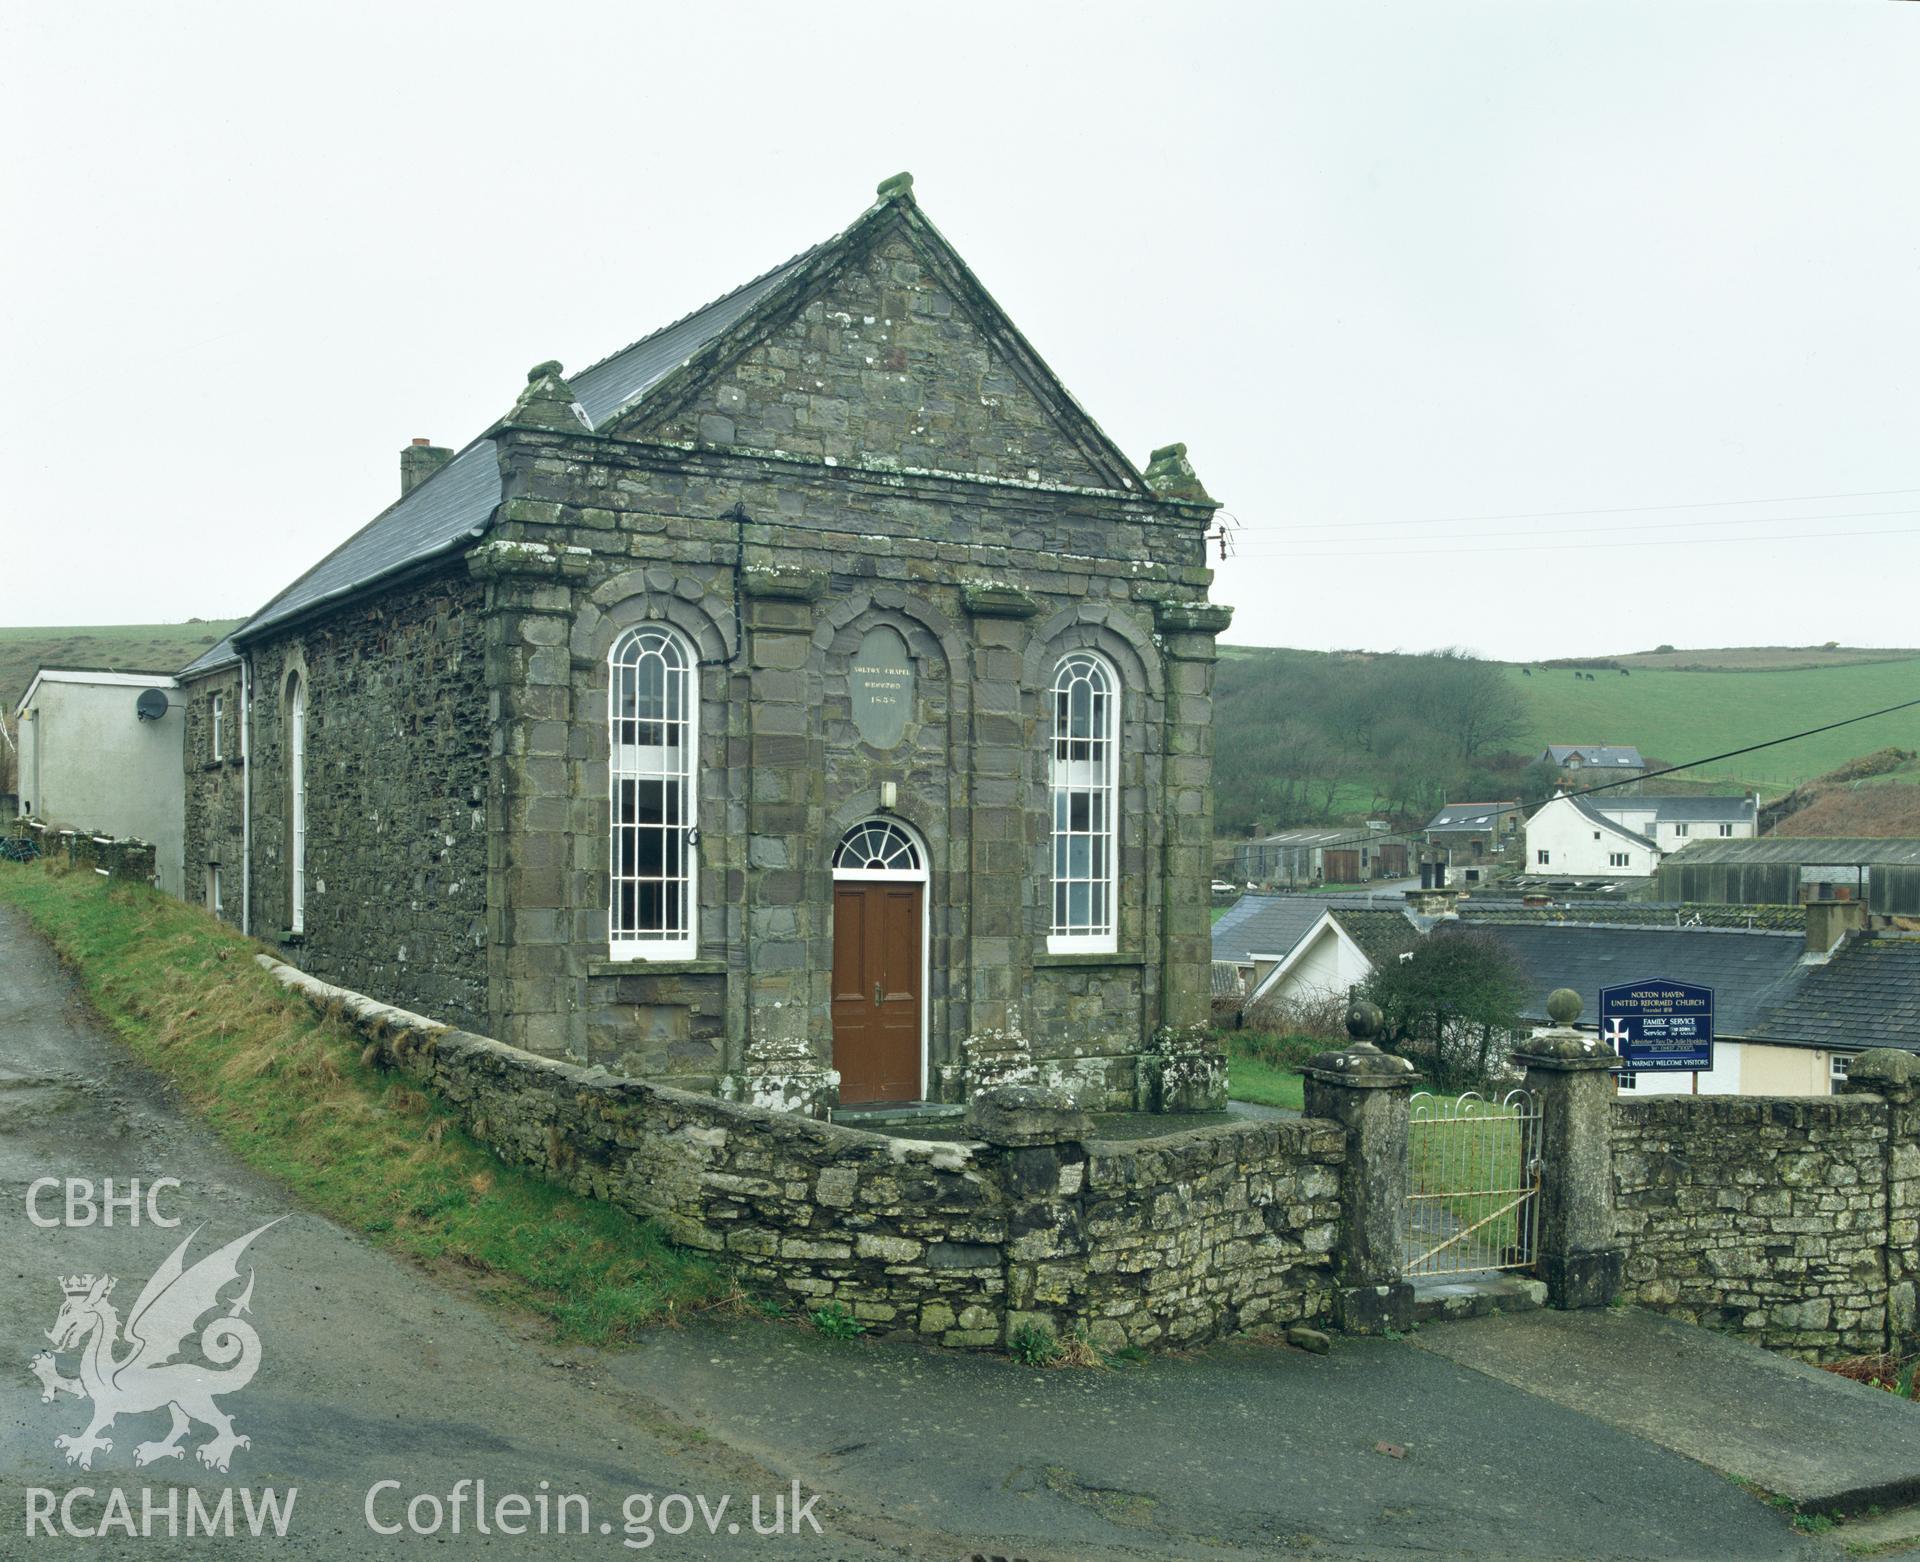 RCAHMW colour transparency showing Nolton Haven Chapel, taken by I.N. Wright, 2003.